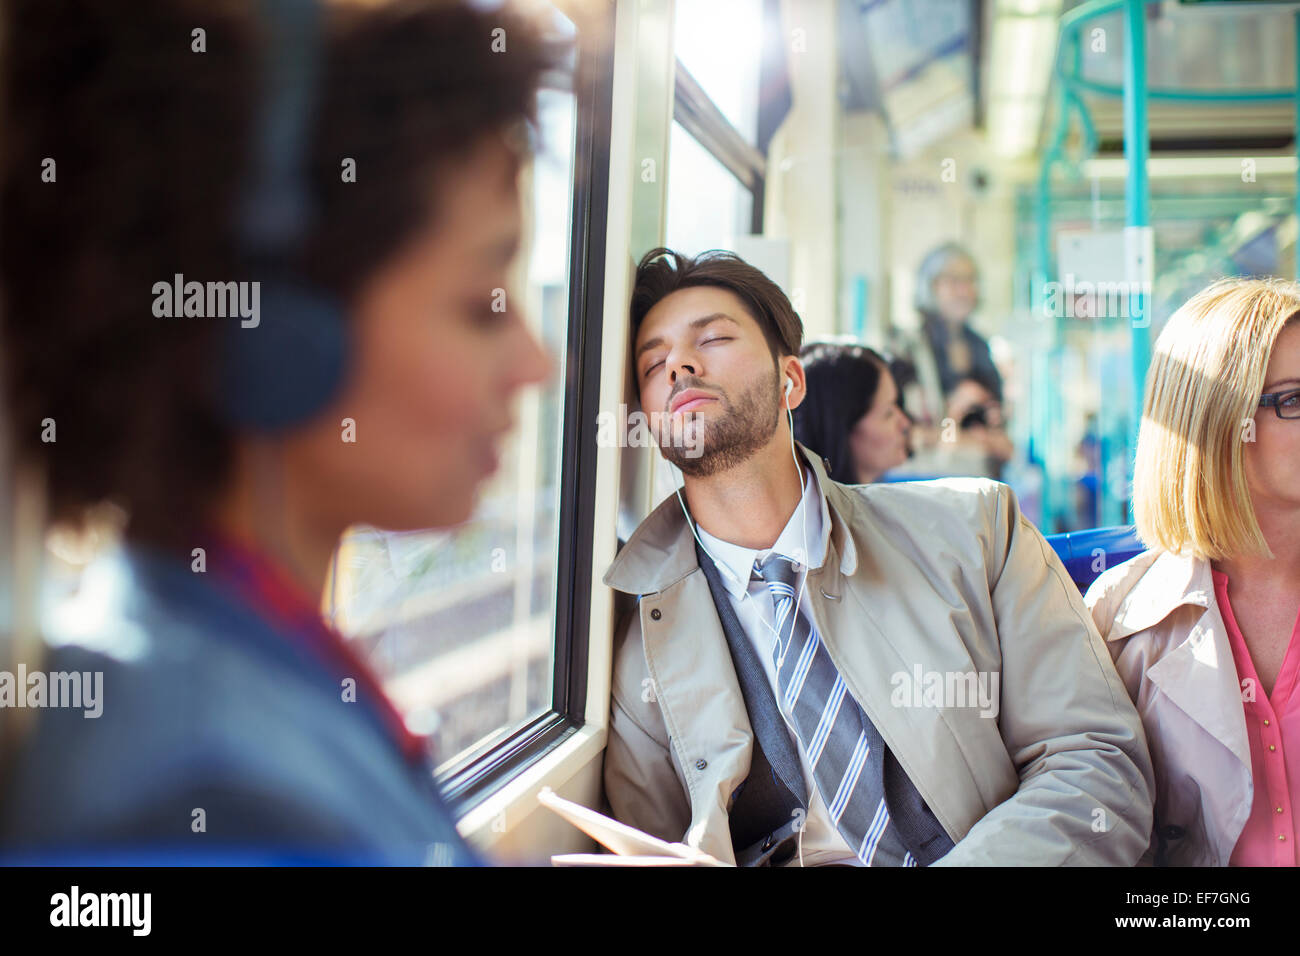 Businessman napping on train Stock Photo